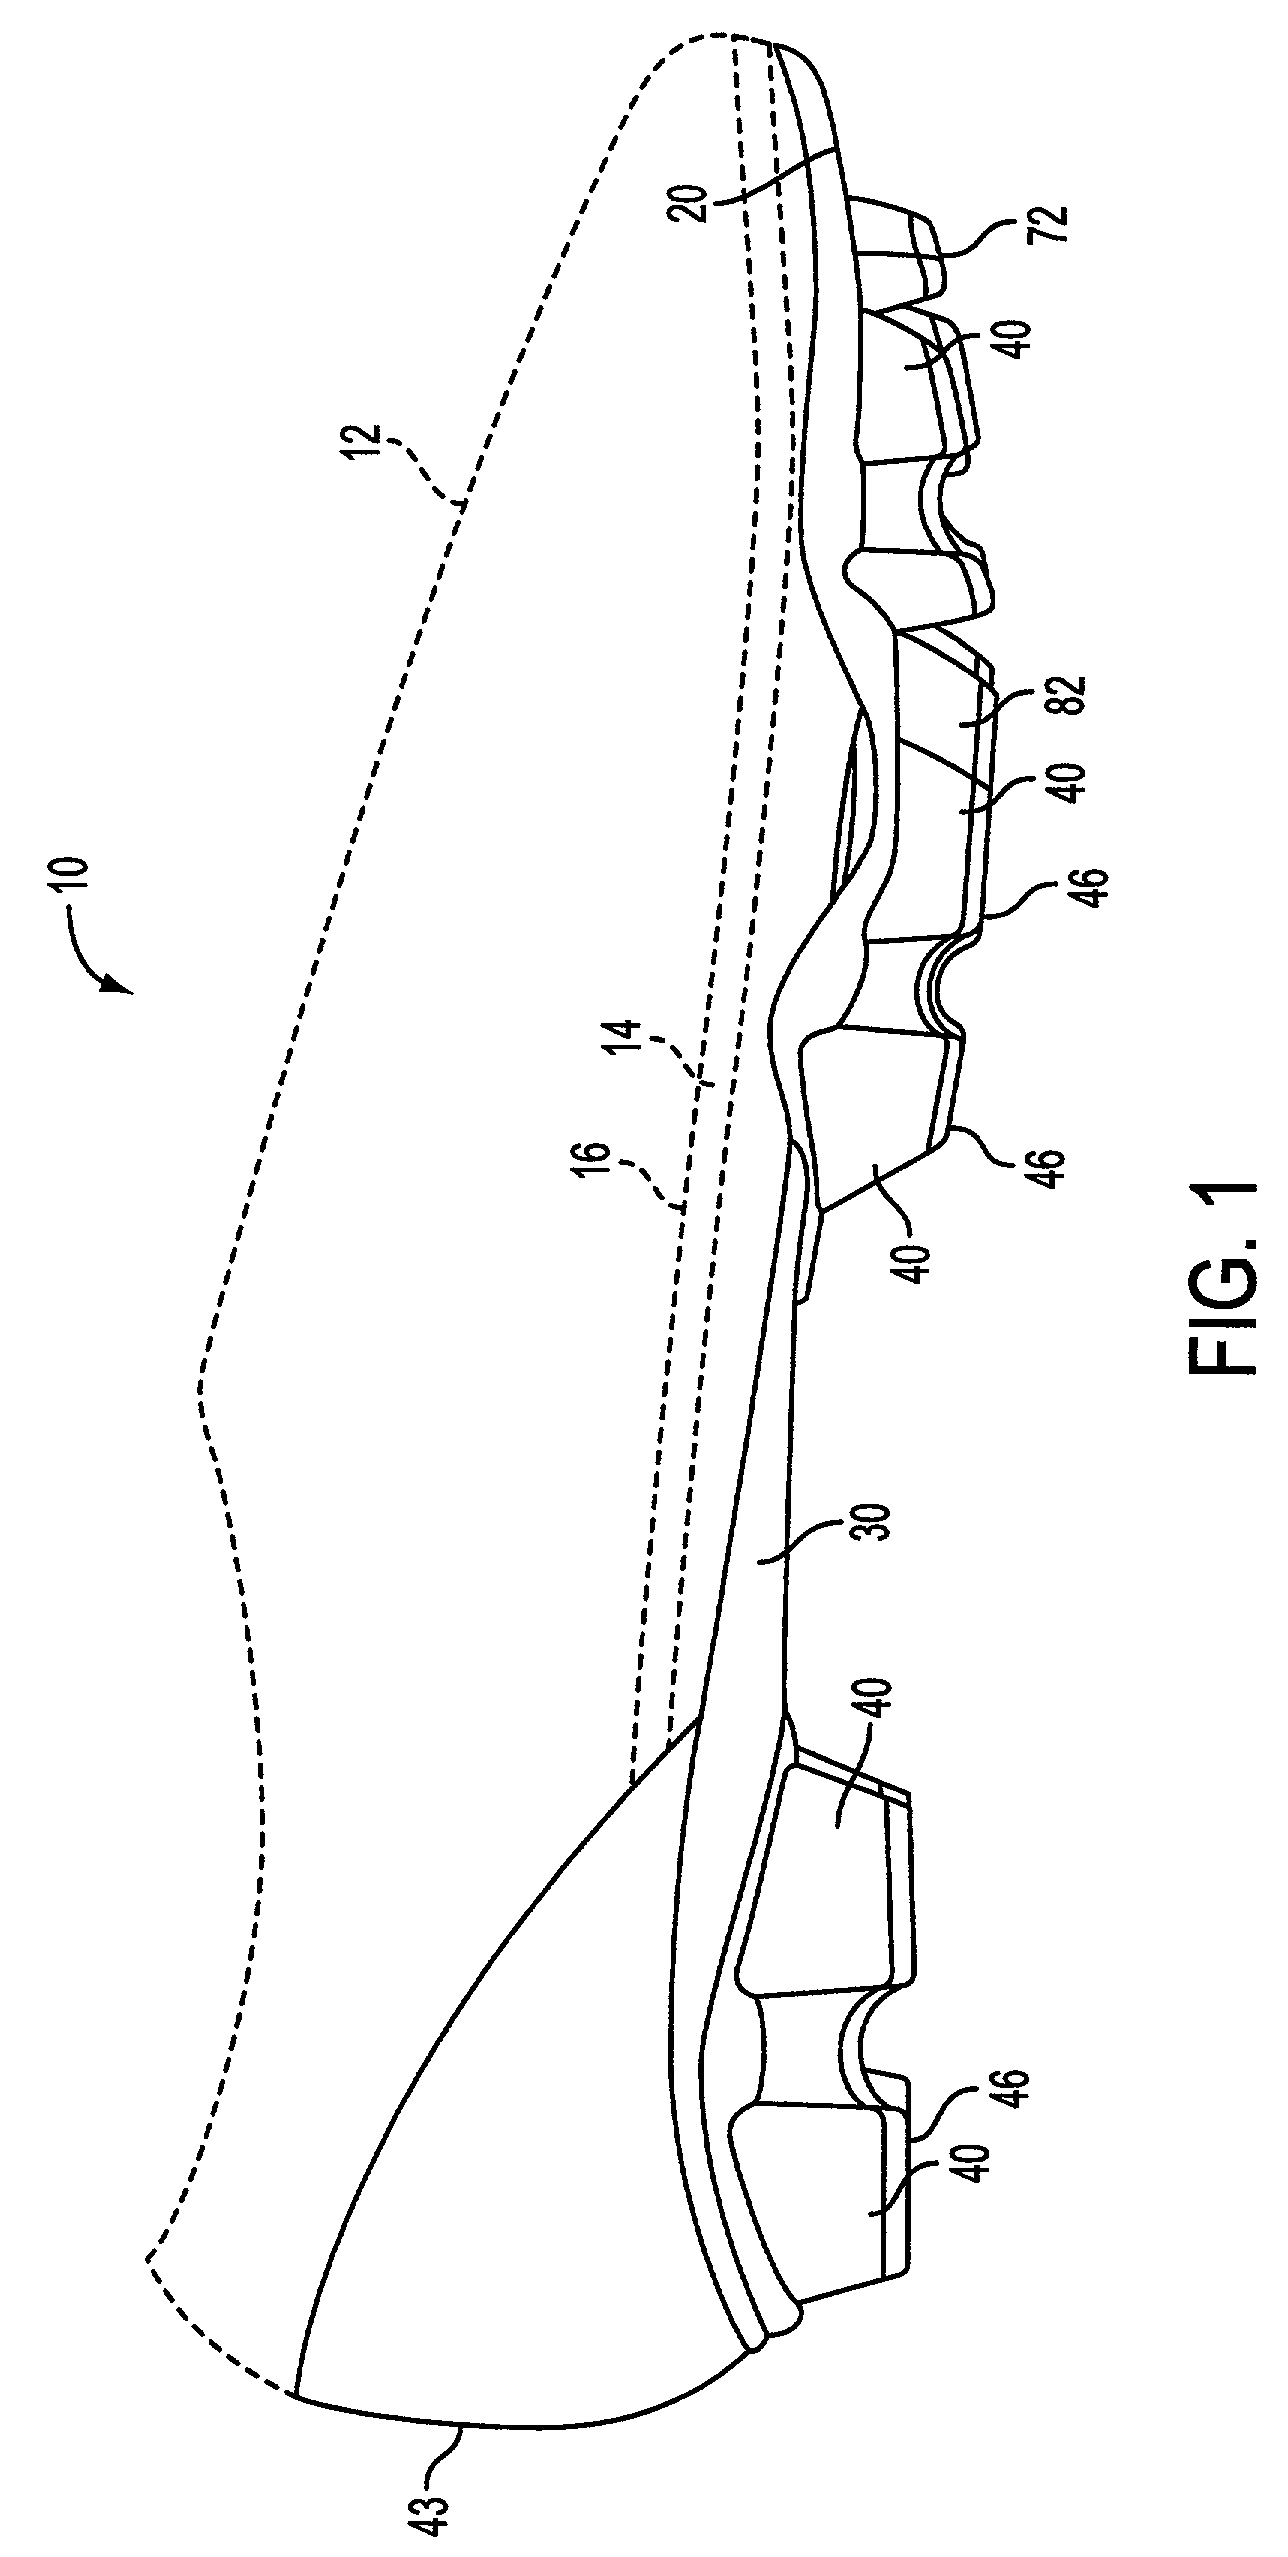 Article of footwear having a regional cleat configuration